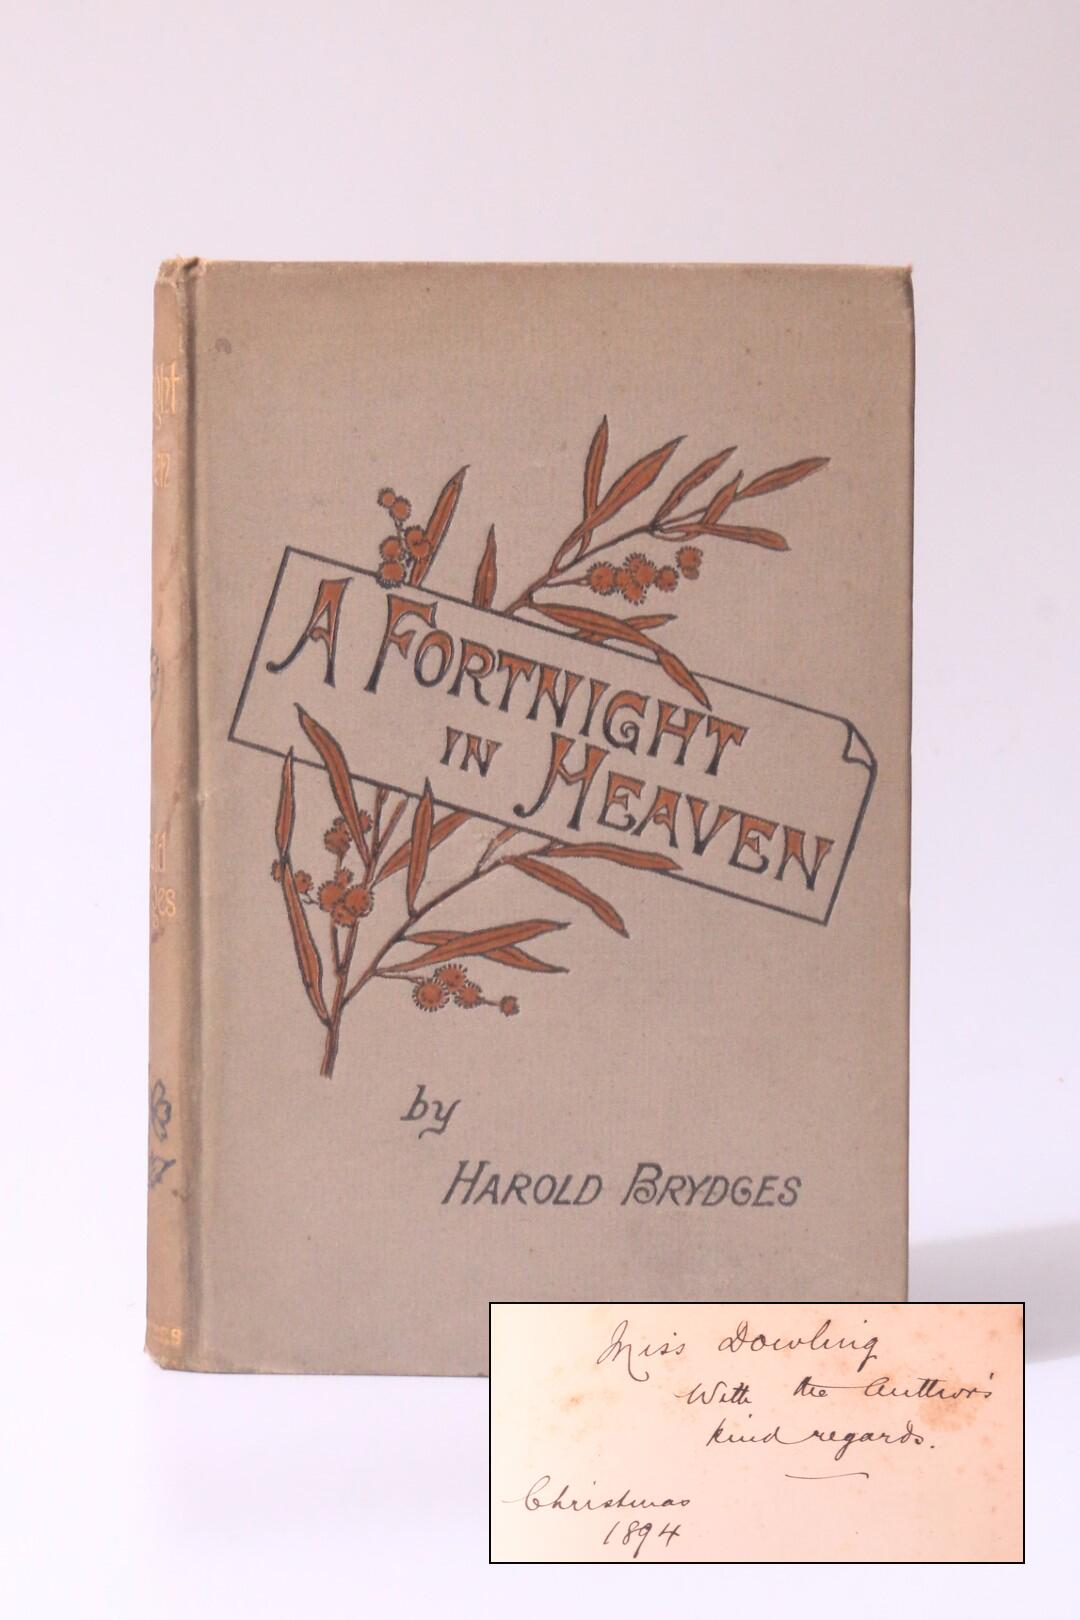 Harold Brydges [pseudonym James Howard Bridge] - A Fortnight in Heaven - Henry Holt, 1886, Signed First Edition.